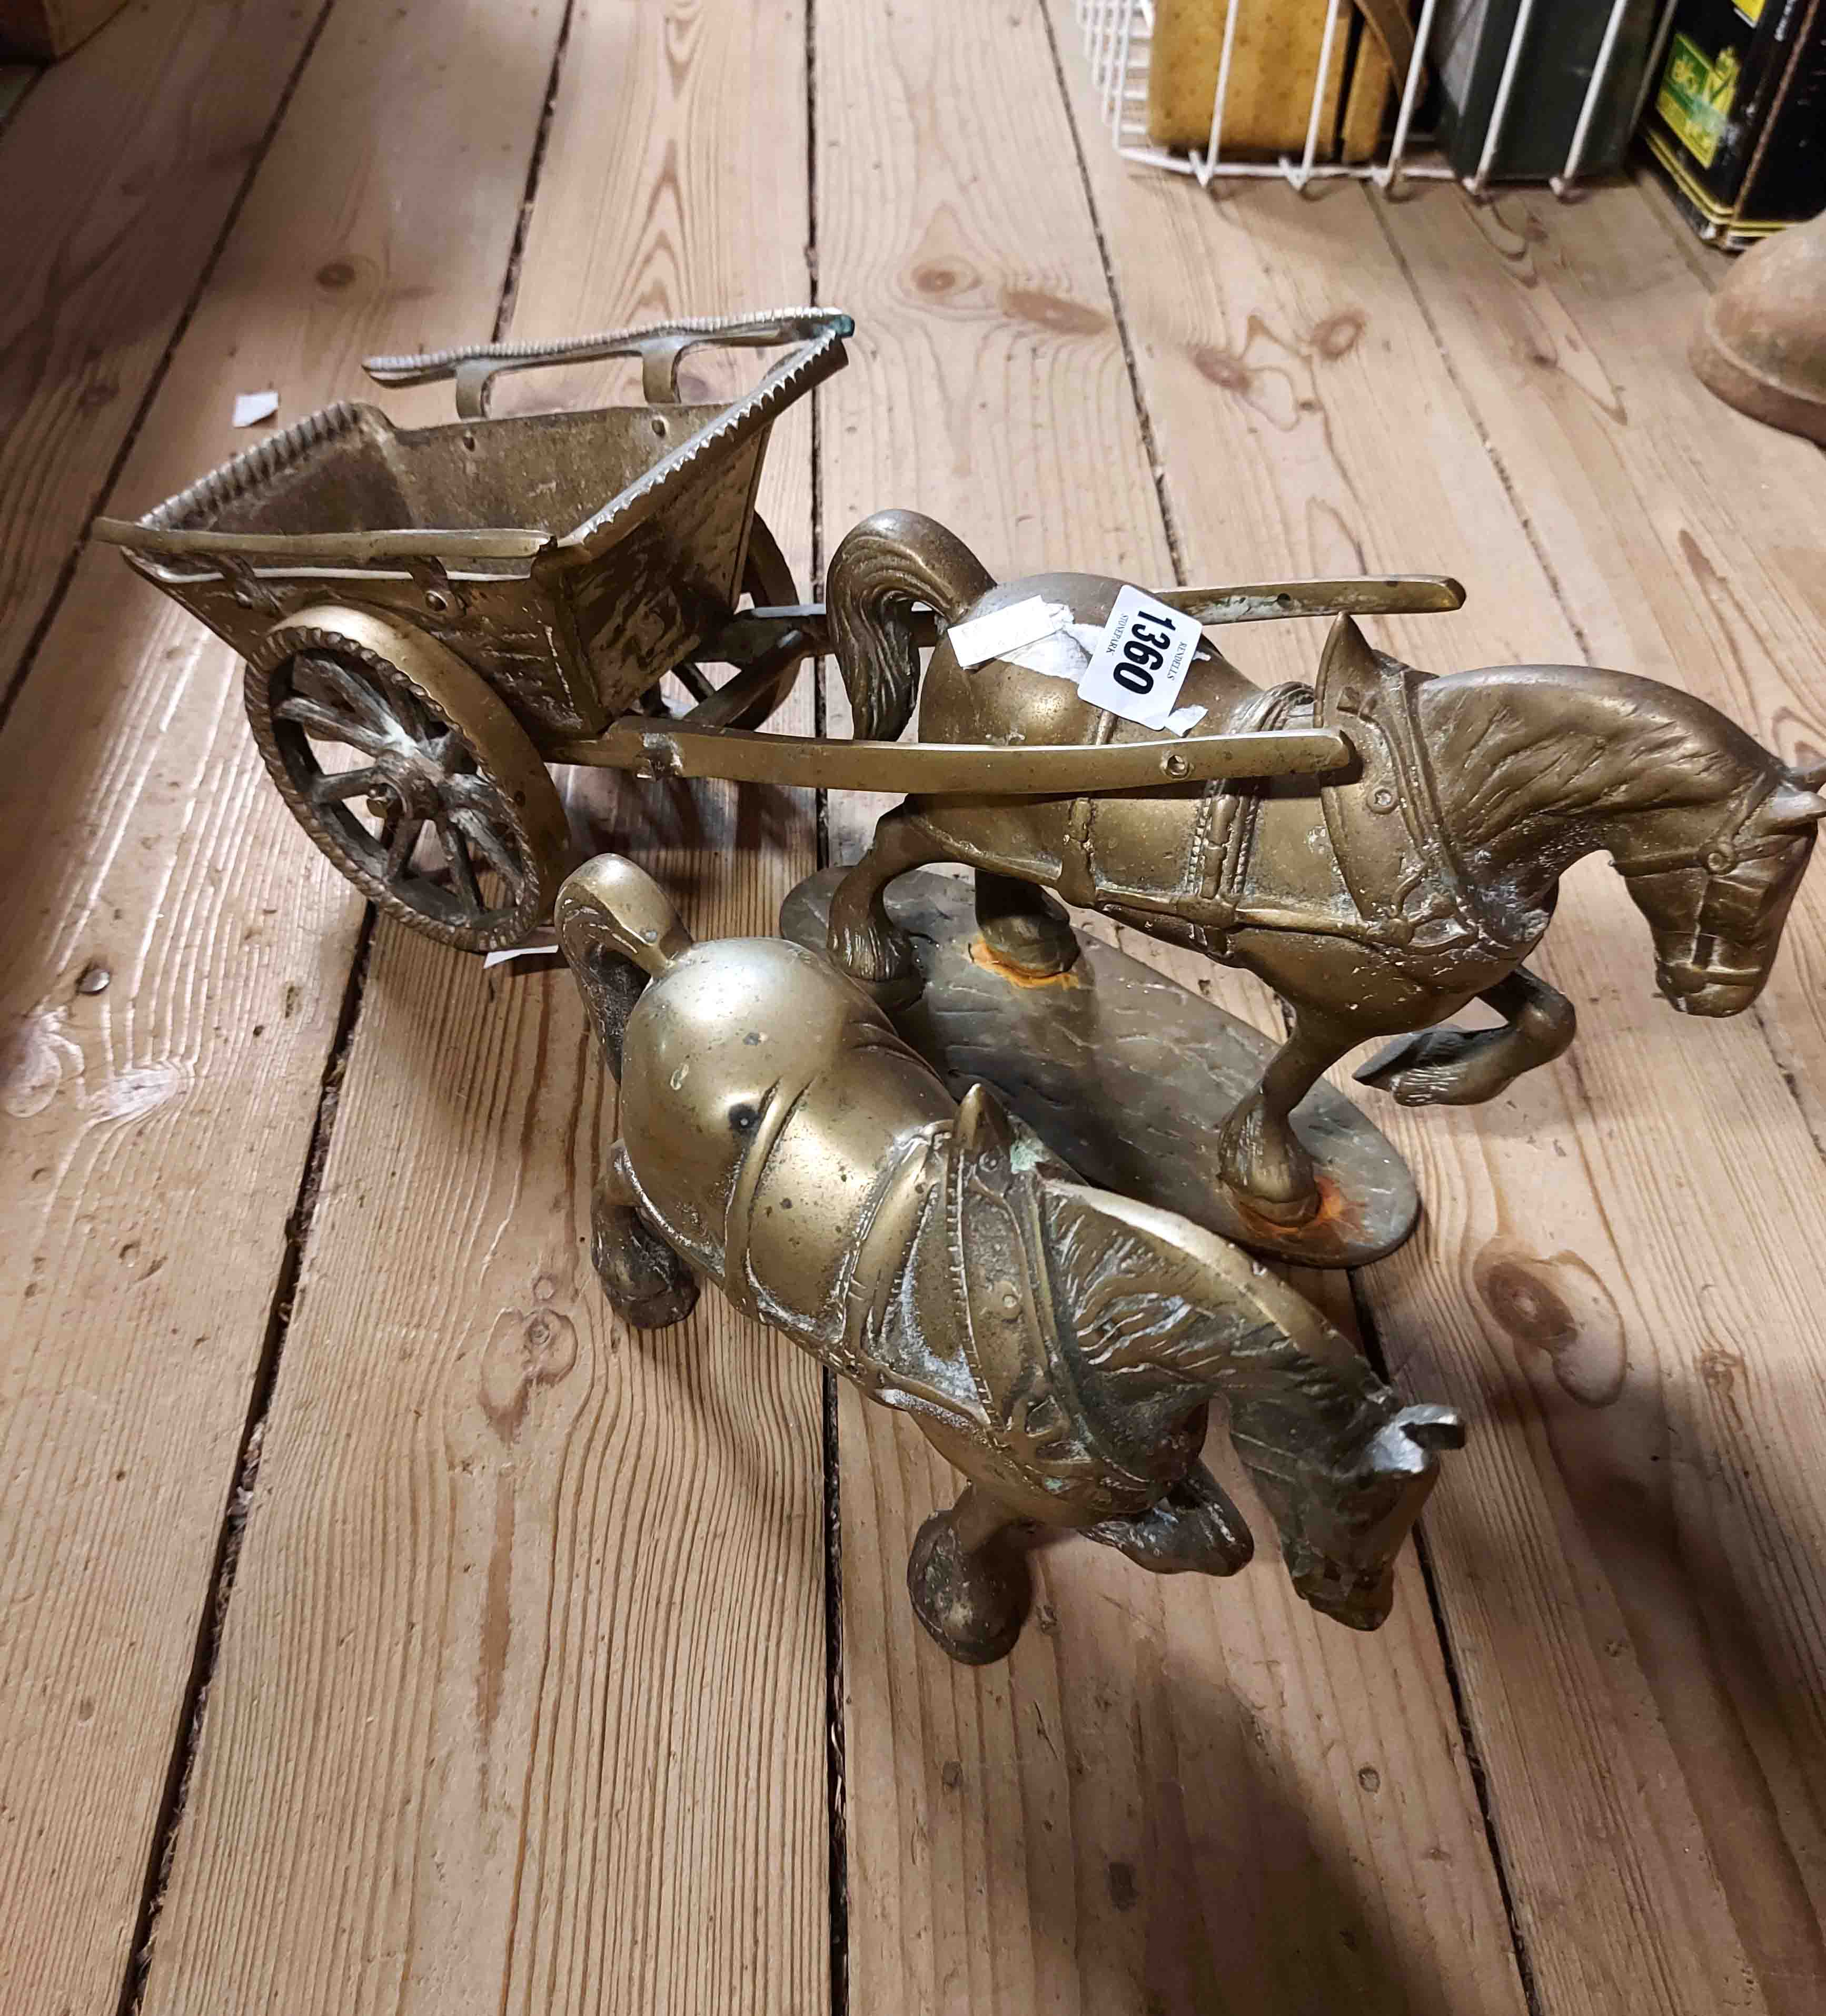 A cast brass model of a horse and cart - sold with a similar cart horse figurine